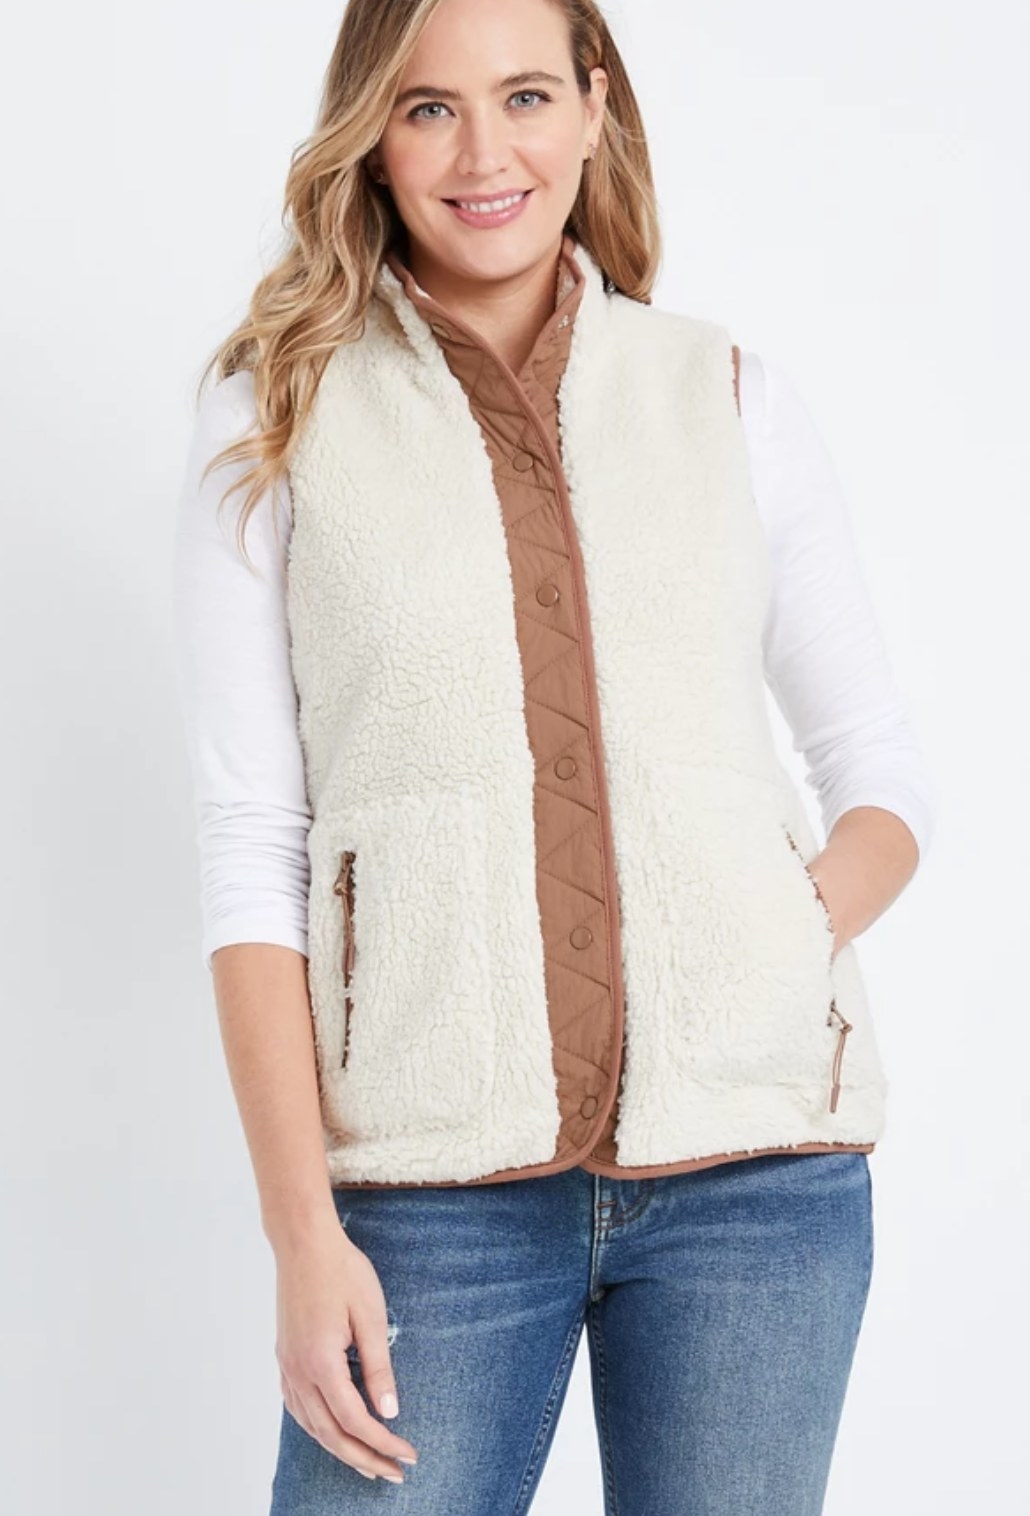 model wearing the white sherpa vest with brown trimming and blue jeans